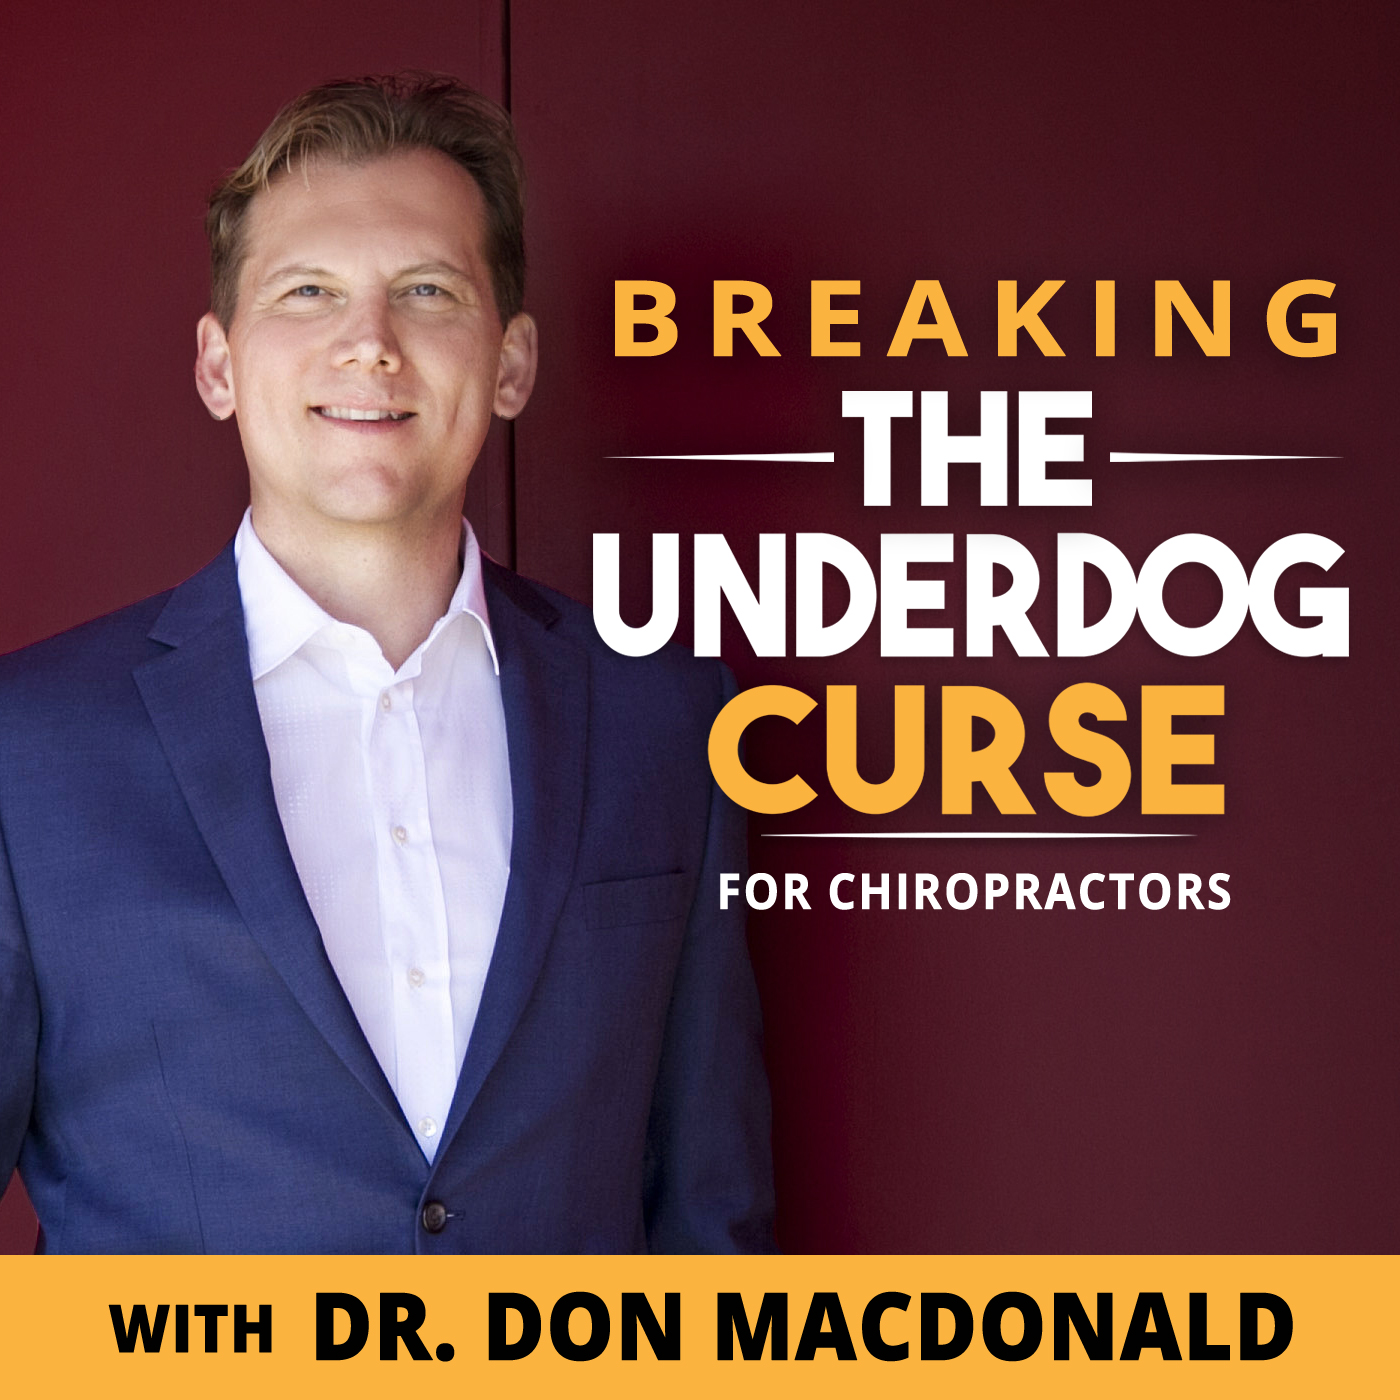 Selling Chiropractic Instead Of Yourself As The Chiropractor - Dr. Donald Francis